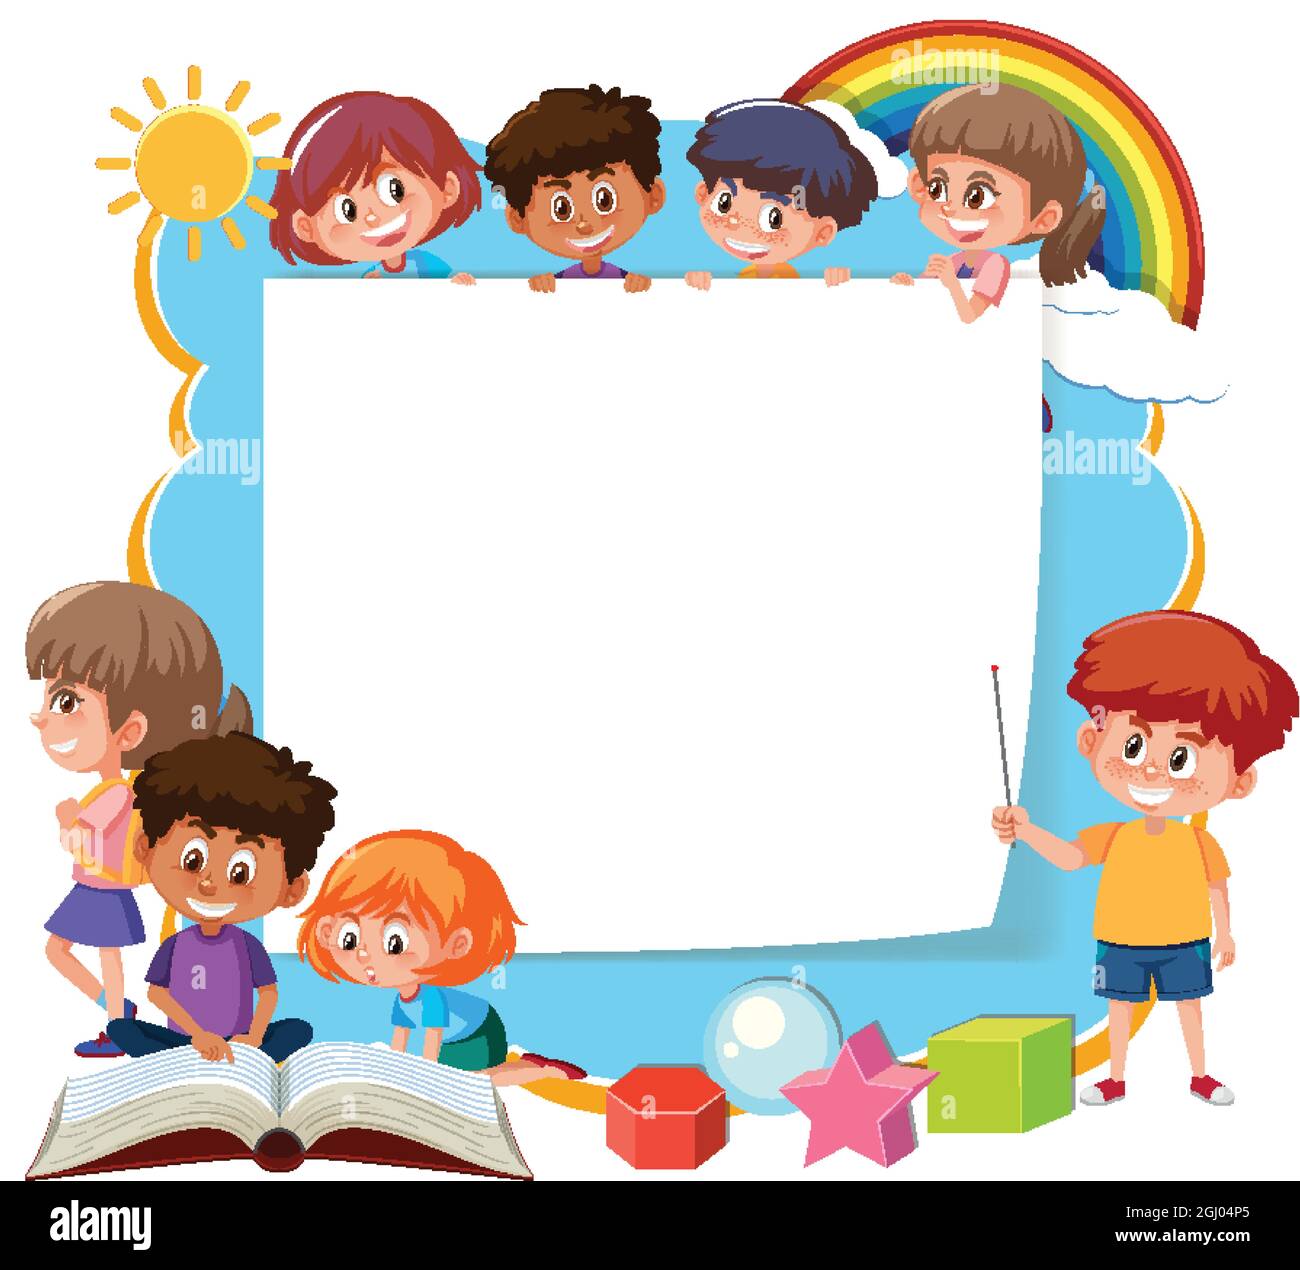 Frame template with school kids cartoon character illustration Stock ...